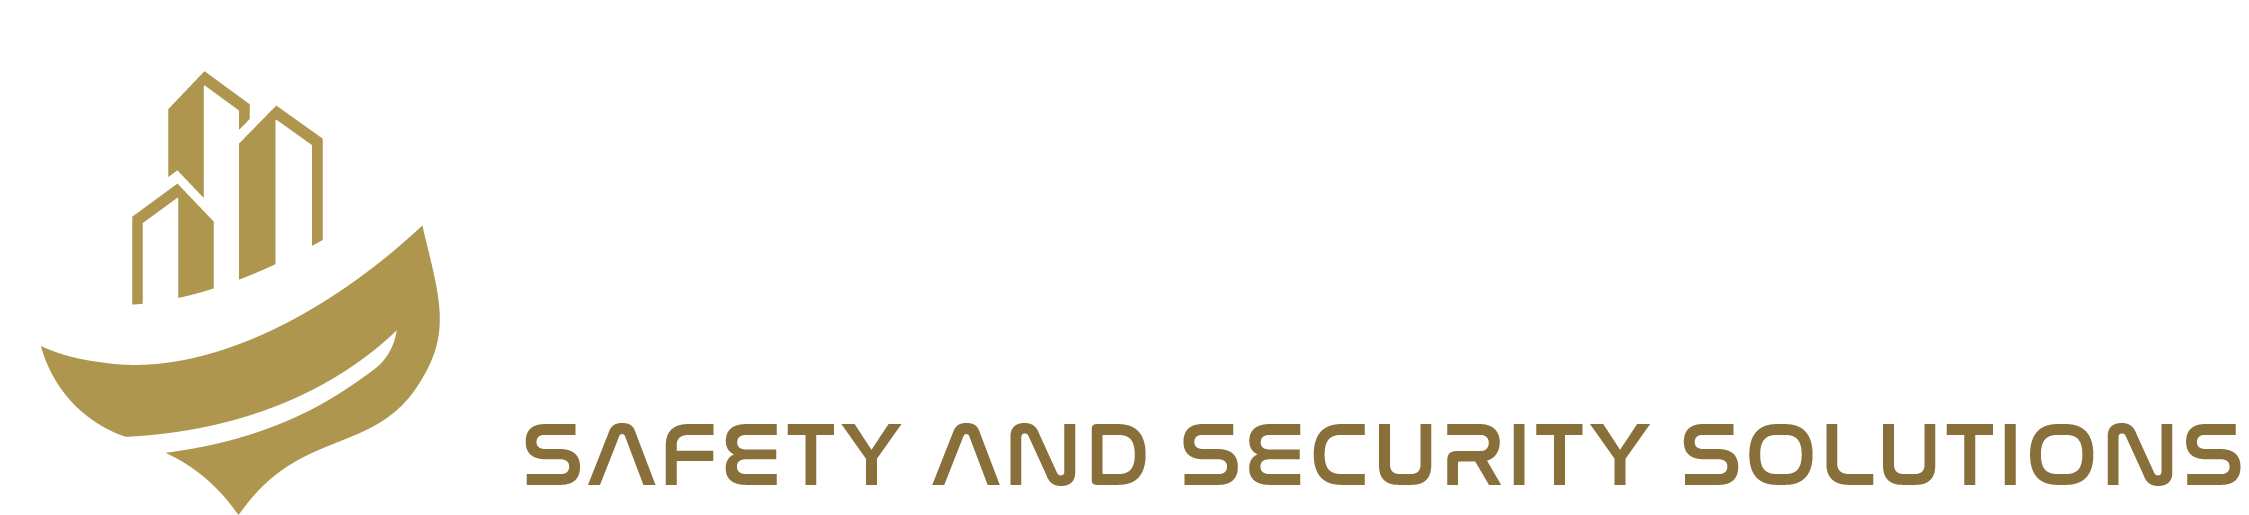 Bryant Safety and Security Solutions – Safety and Security Solutions